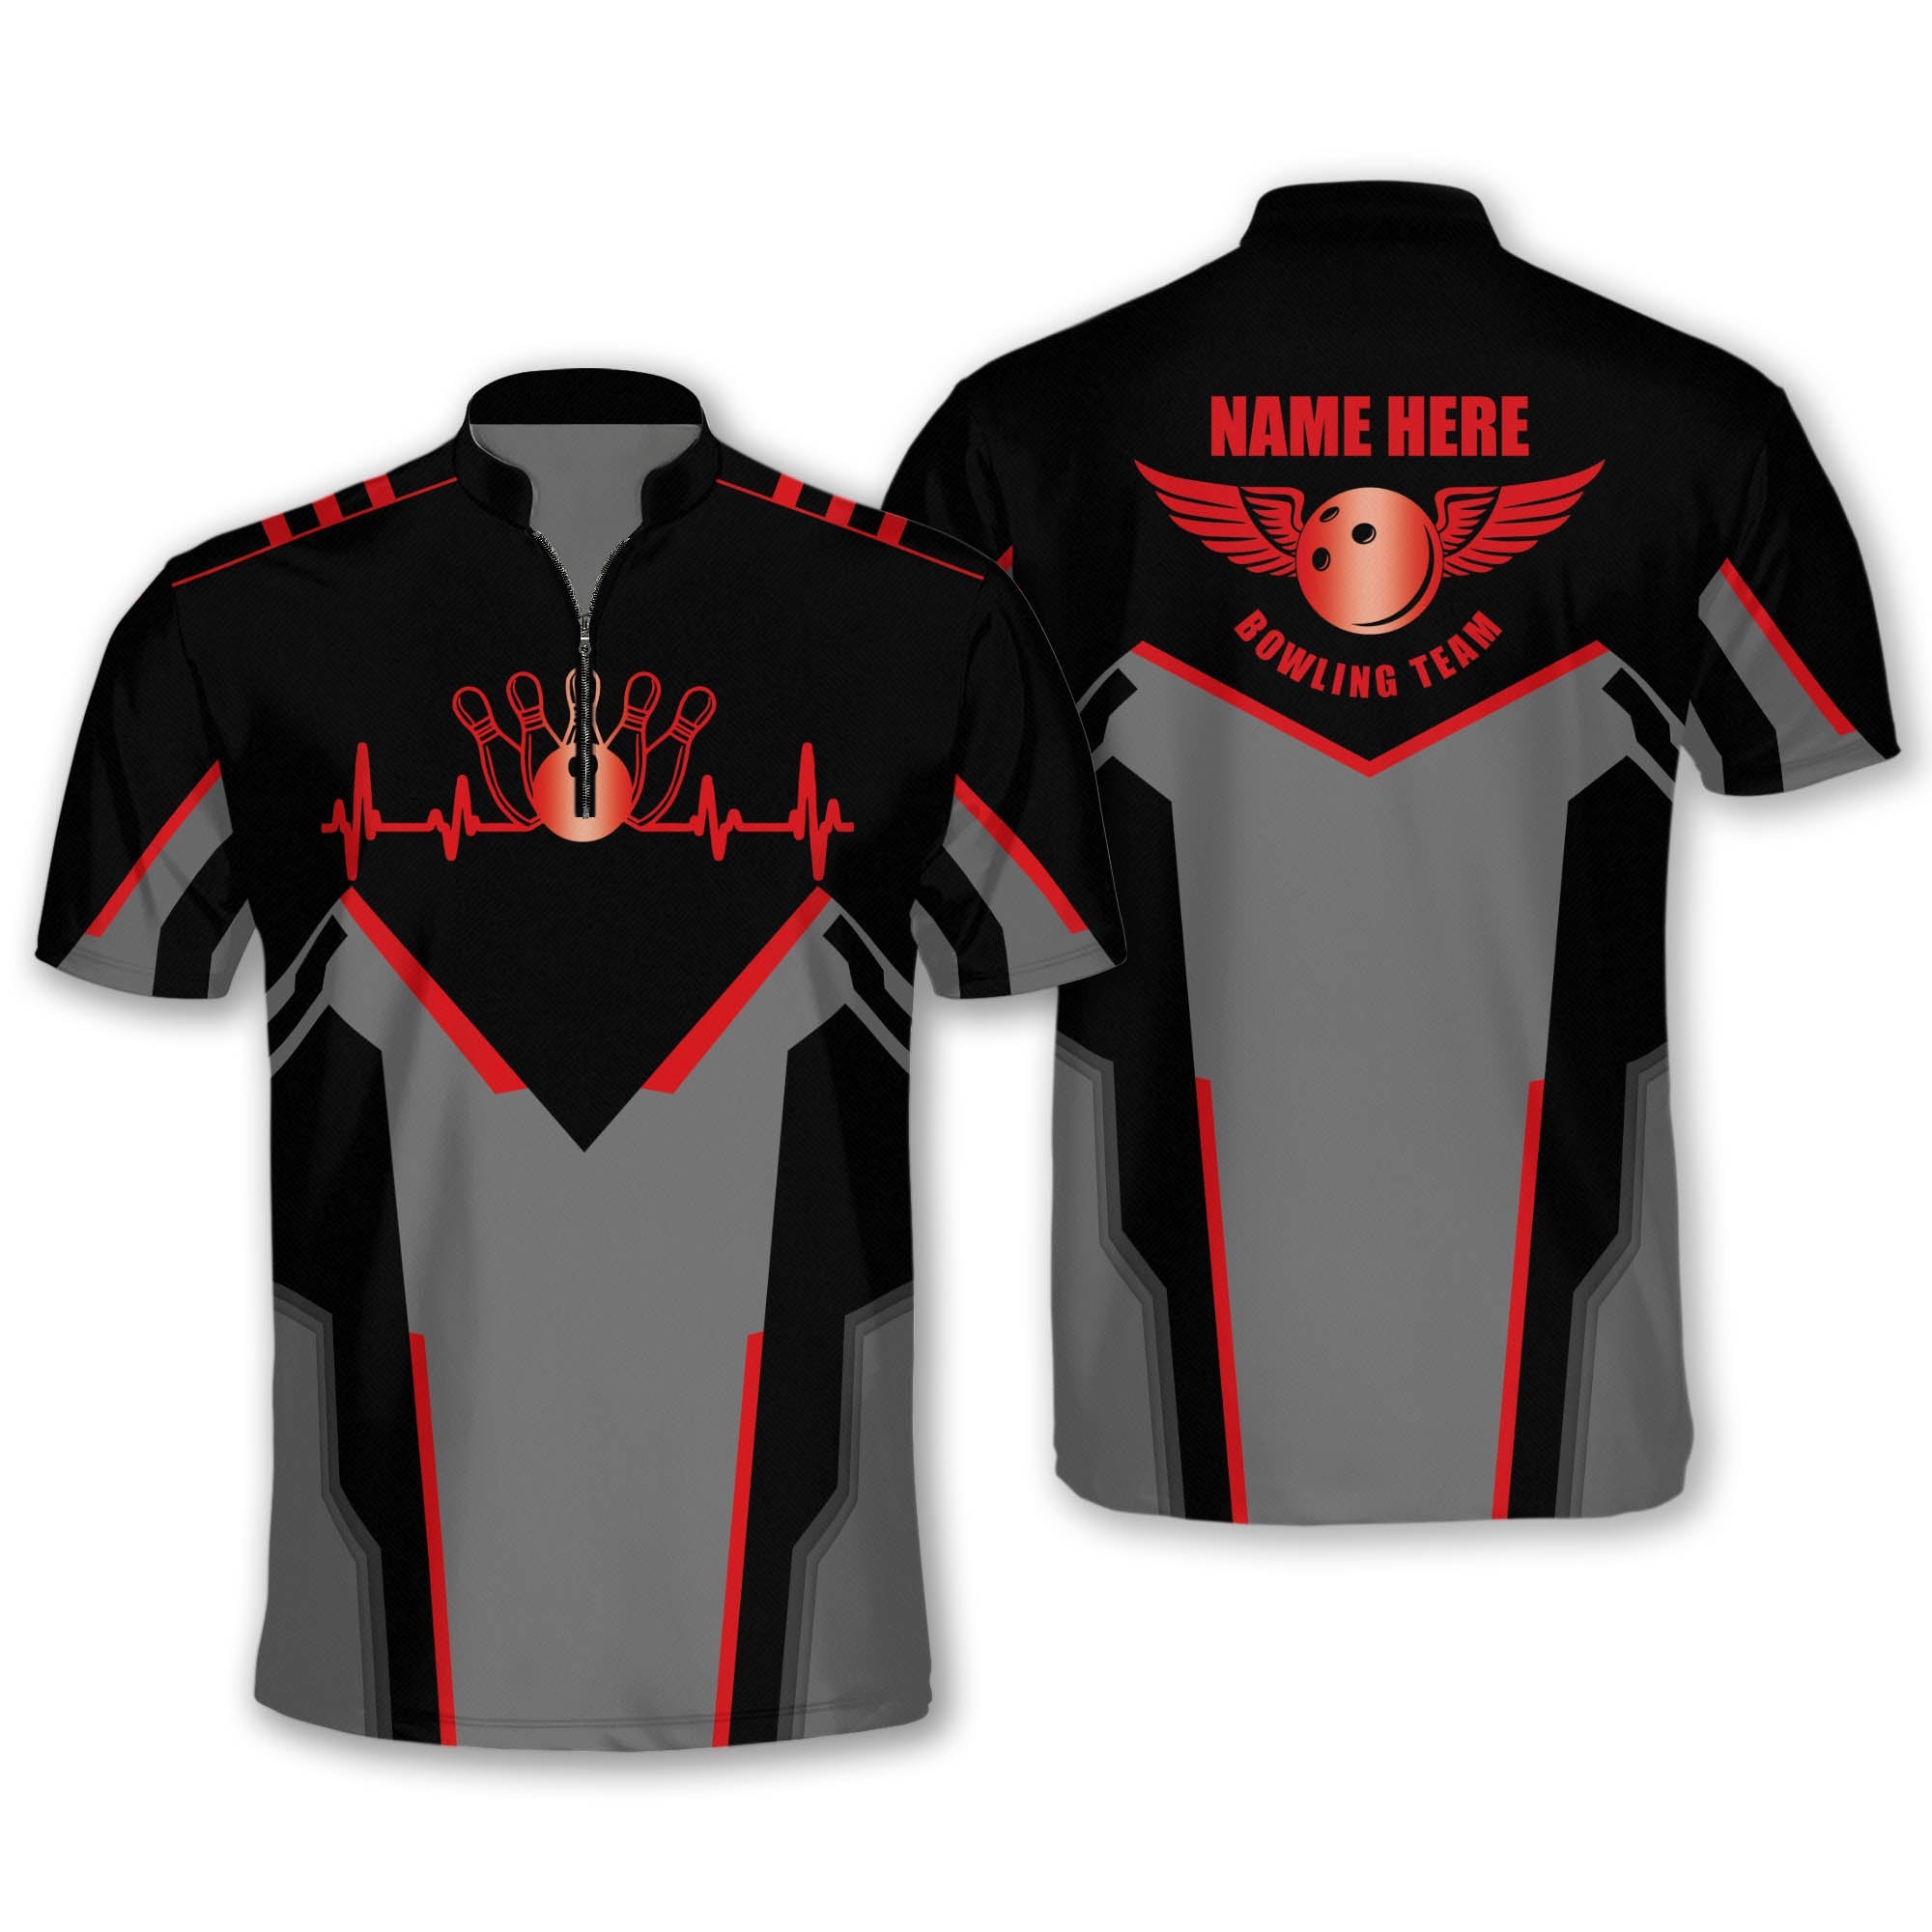 Personalized Heartbeat Bowling Jerseys For Men/ Idea Shirt for Team Bowling Lover